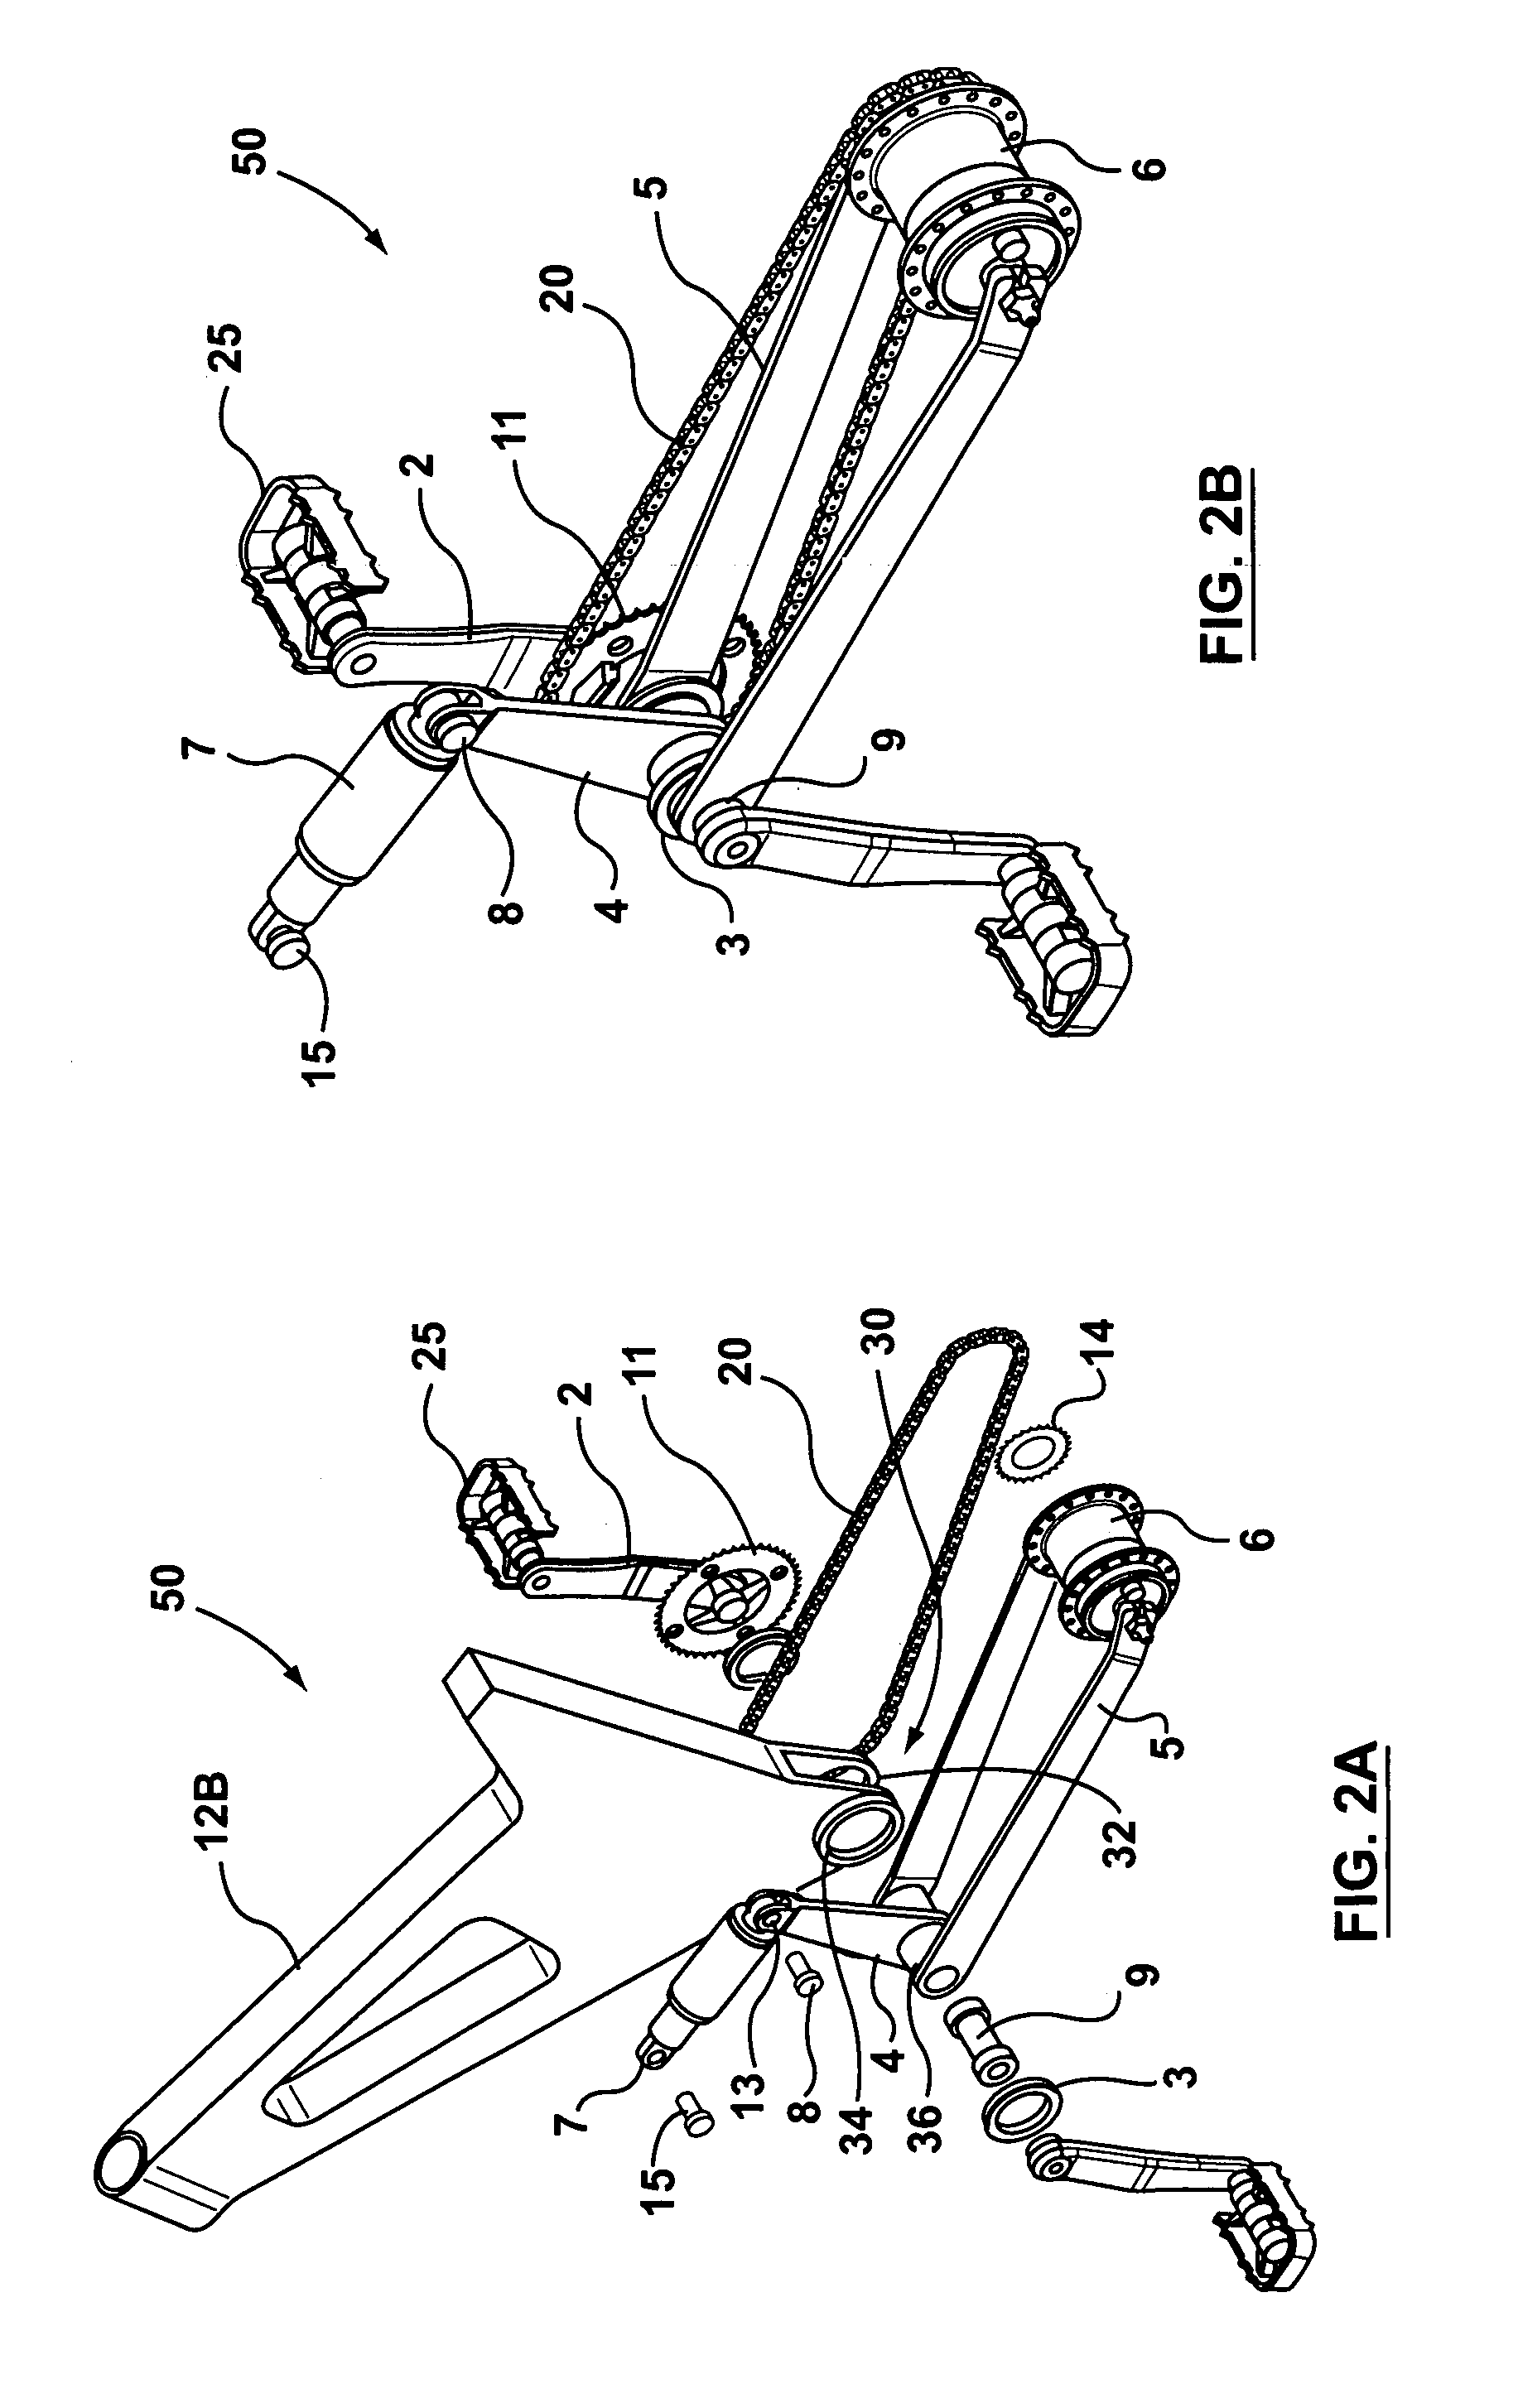 Cantilever rear suspension for a bicycle